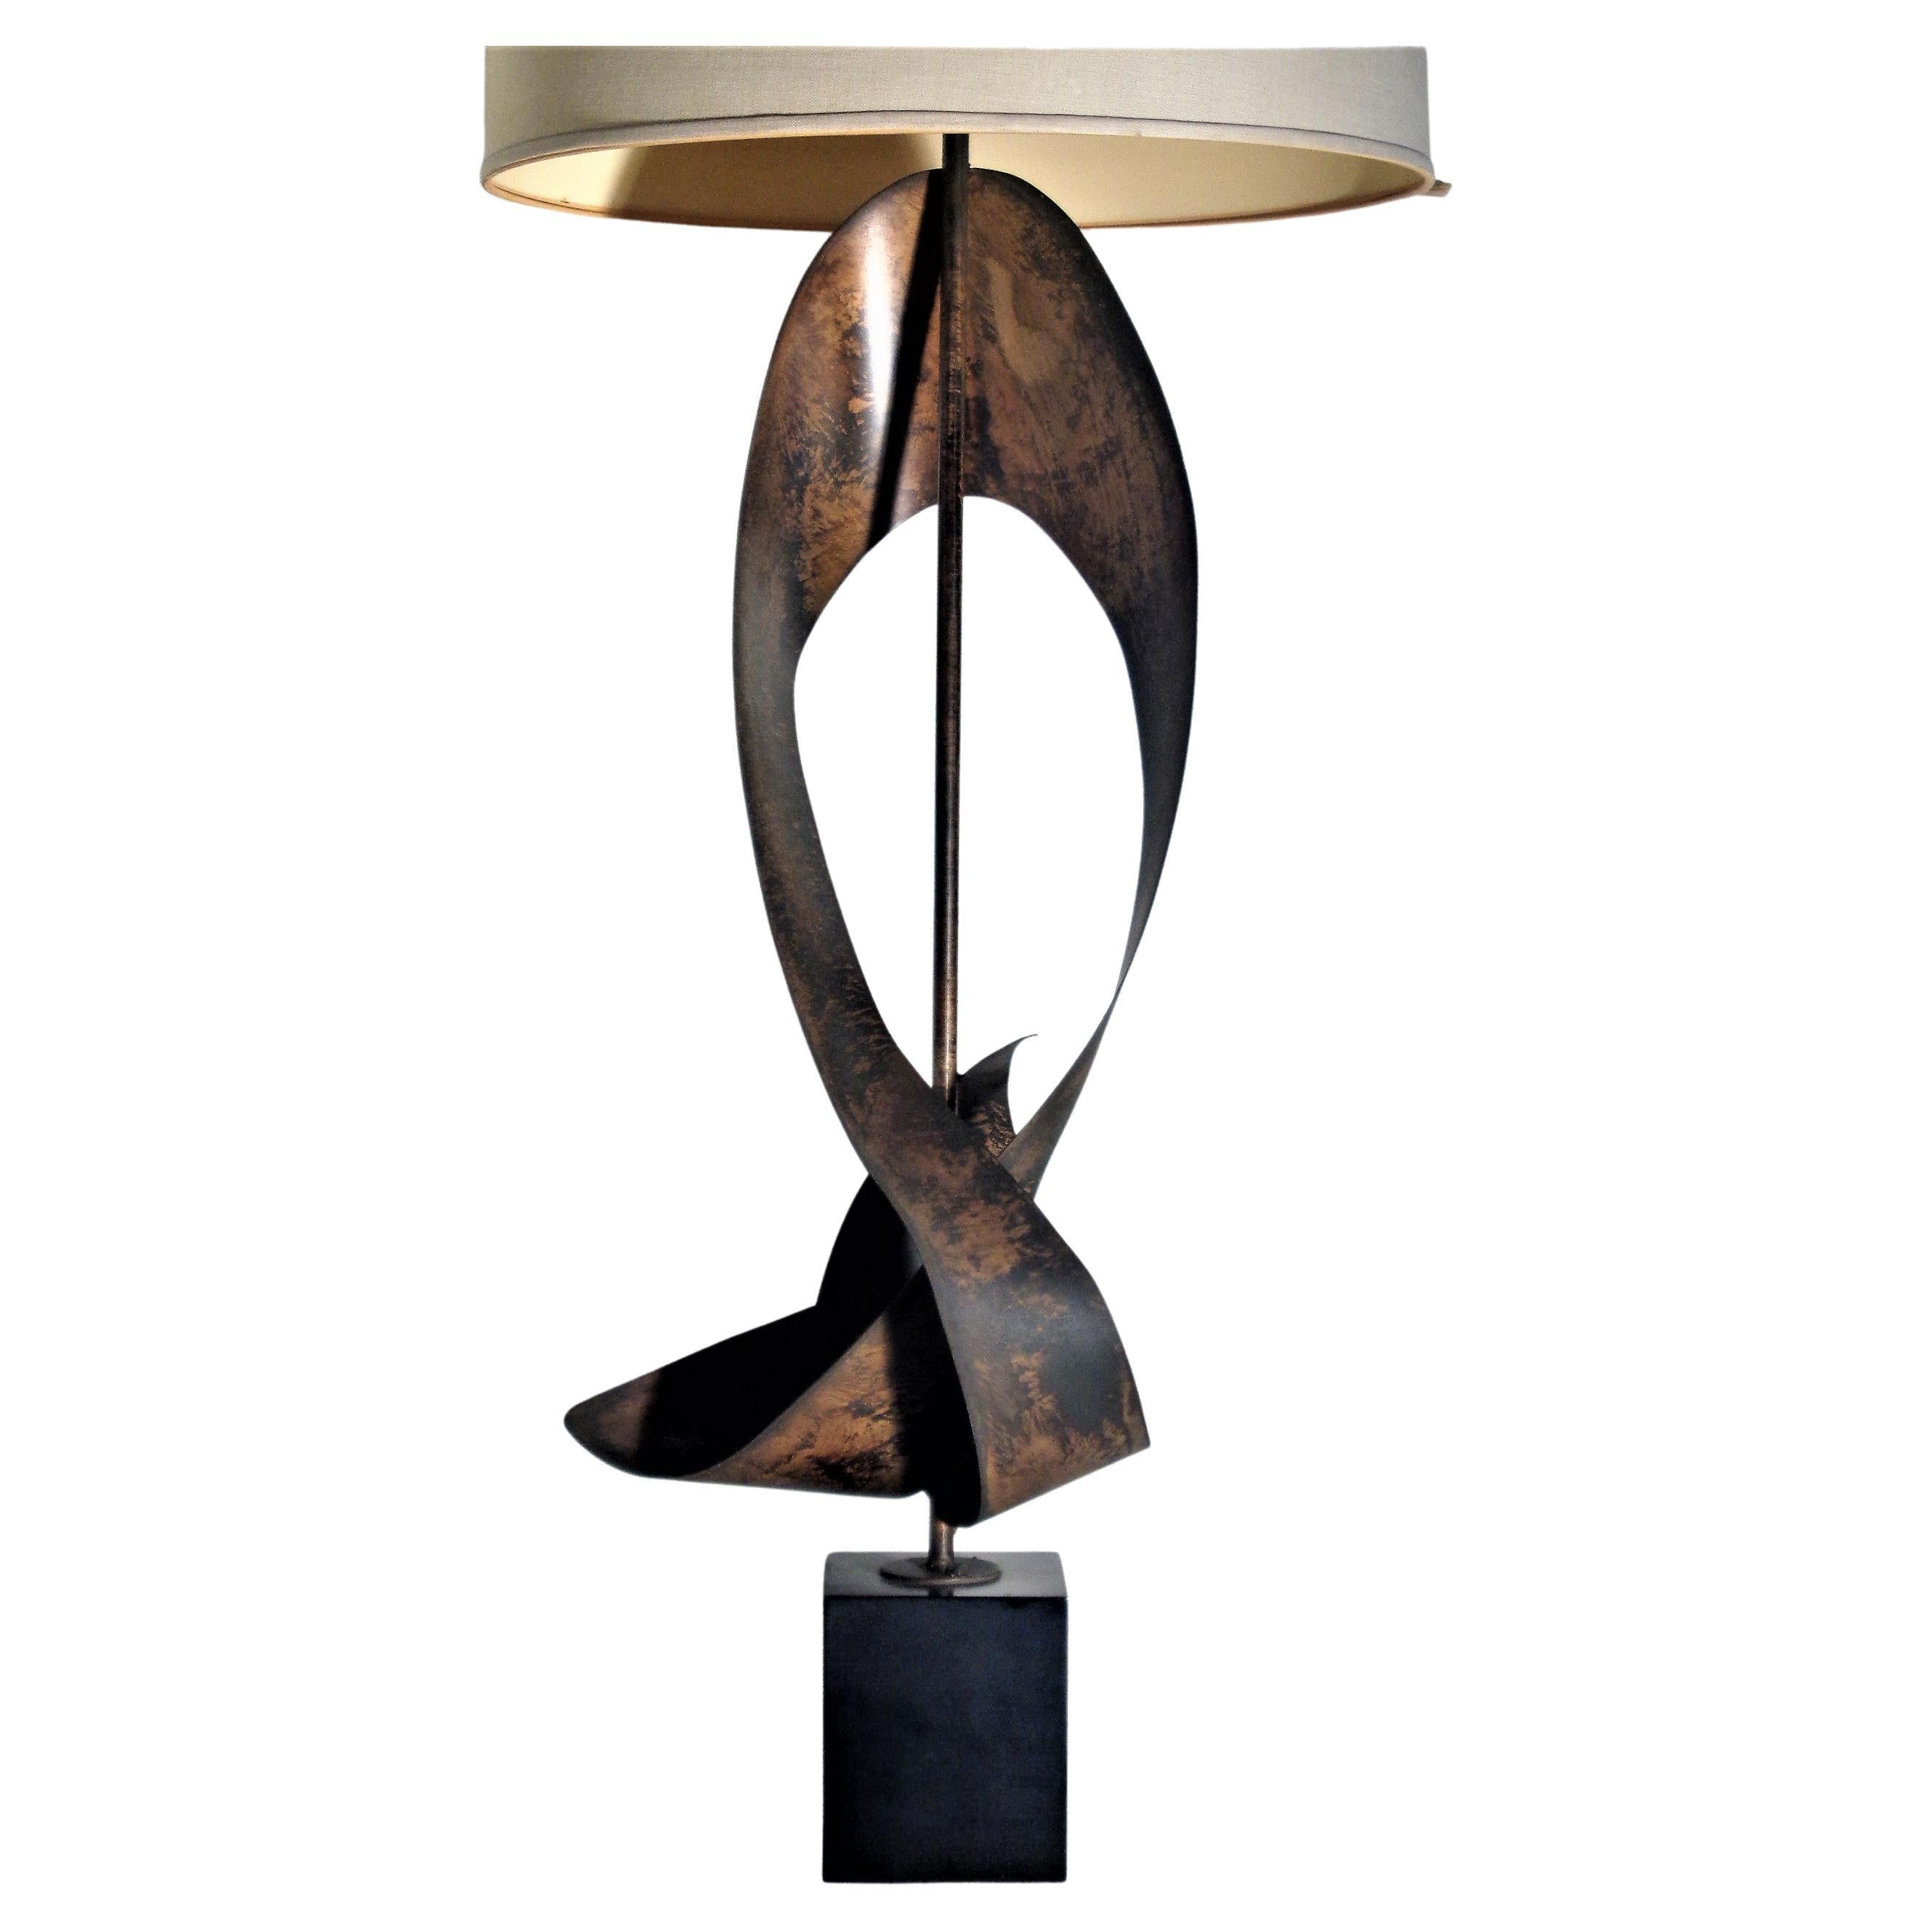 Large sculptural abstract patinated metal ribbon lamp by Harold Weiss / Richard Barr for Laurel in all original condition. Circa 1960. Measures 56